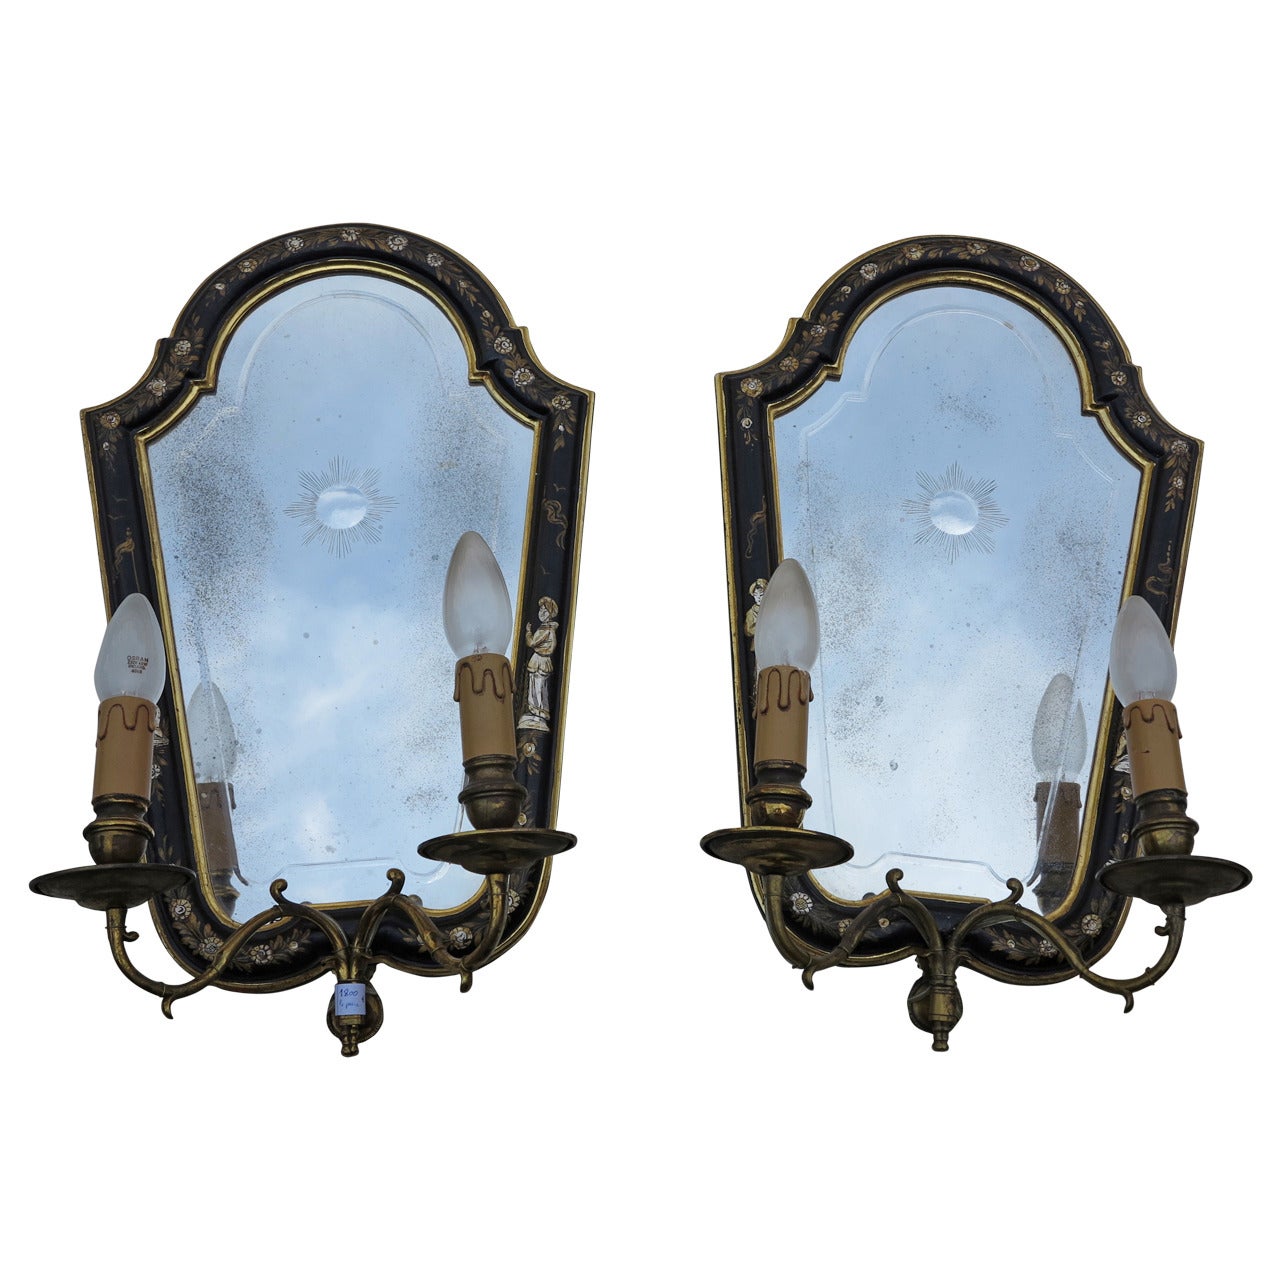 1950s Sconces Pair of Lacquered Wood Chinese Decor